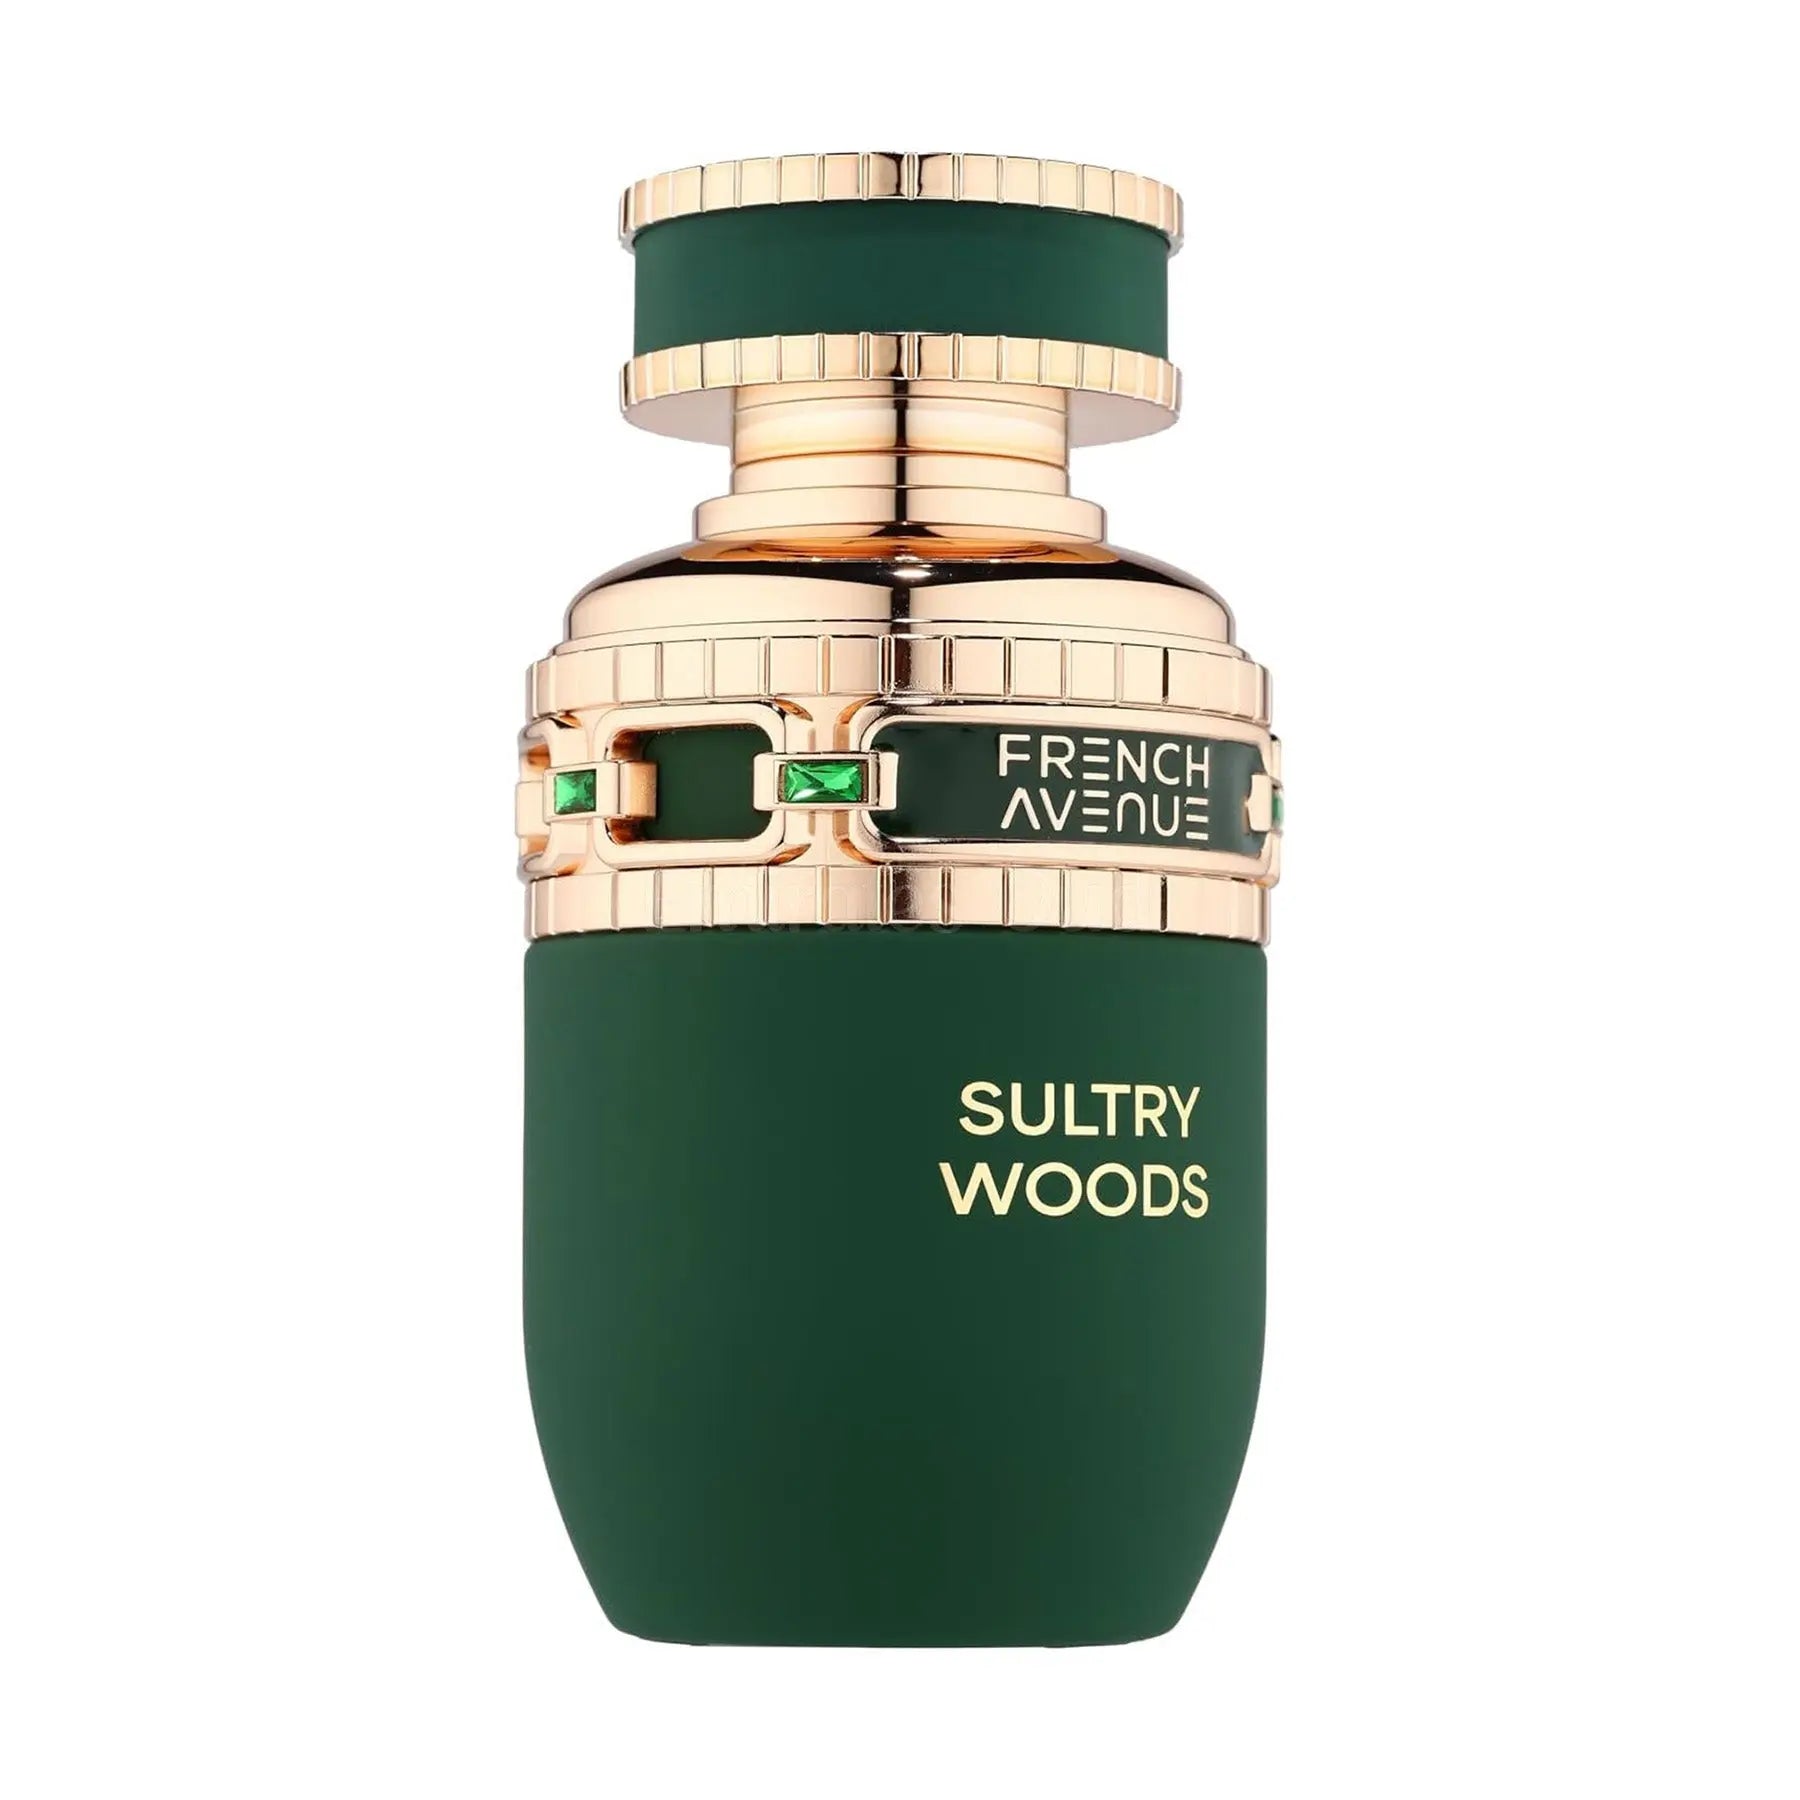 Sultry Woods Perfume 80ml EDP FA Paris by Fragrance World